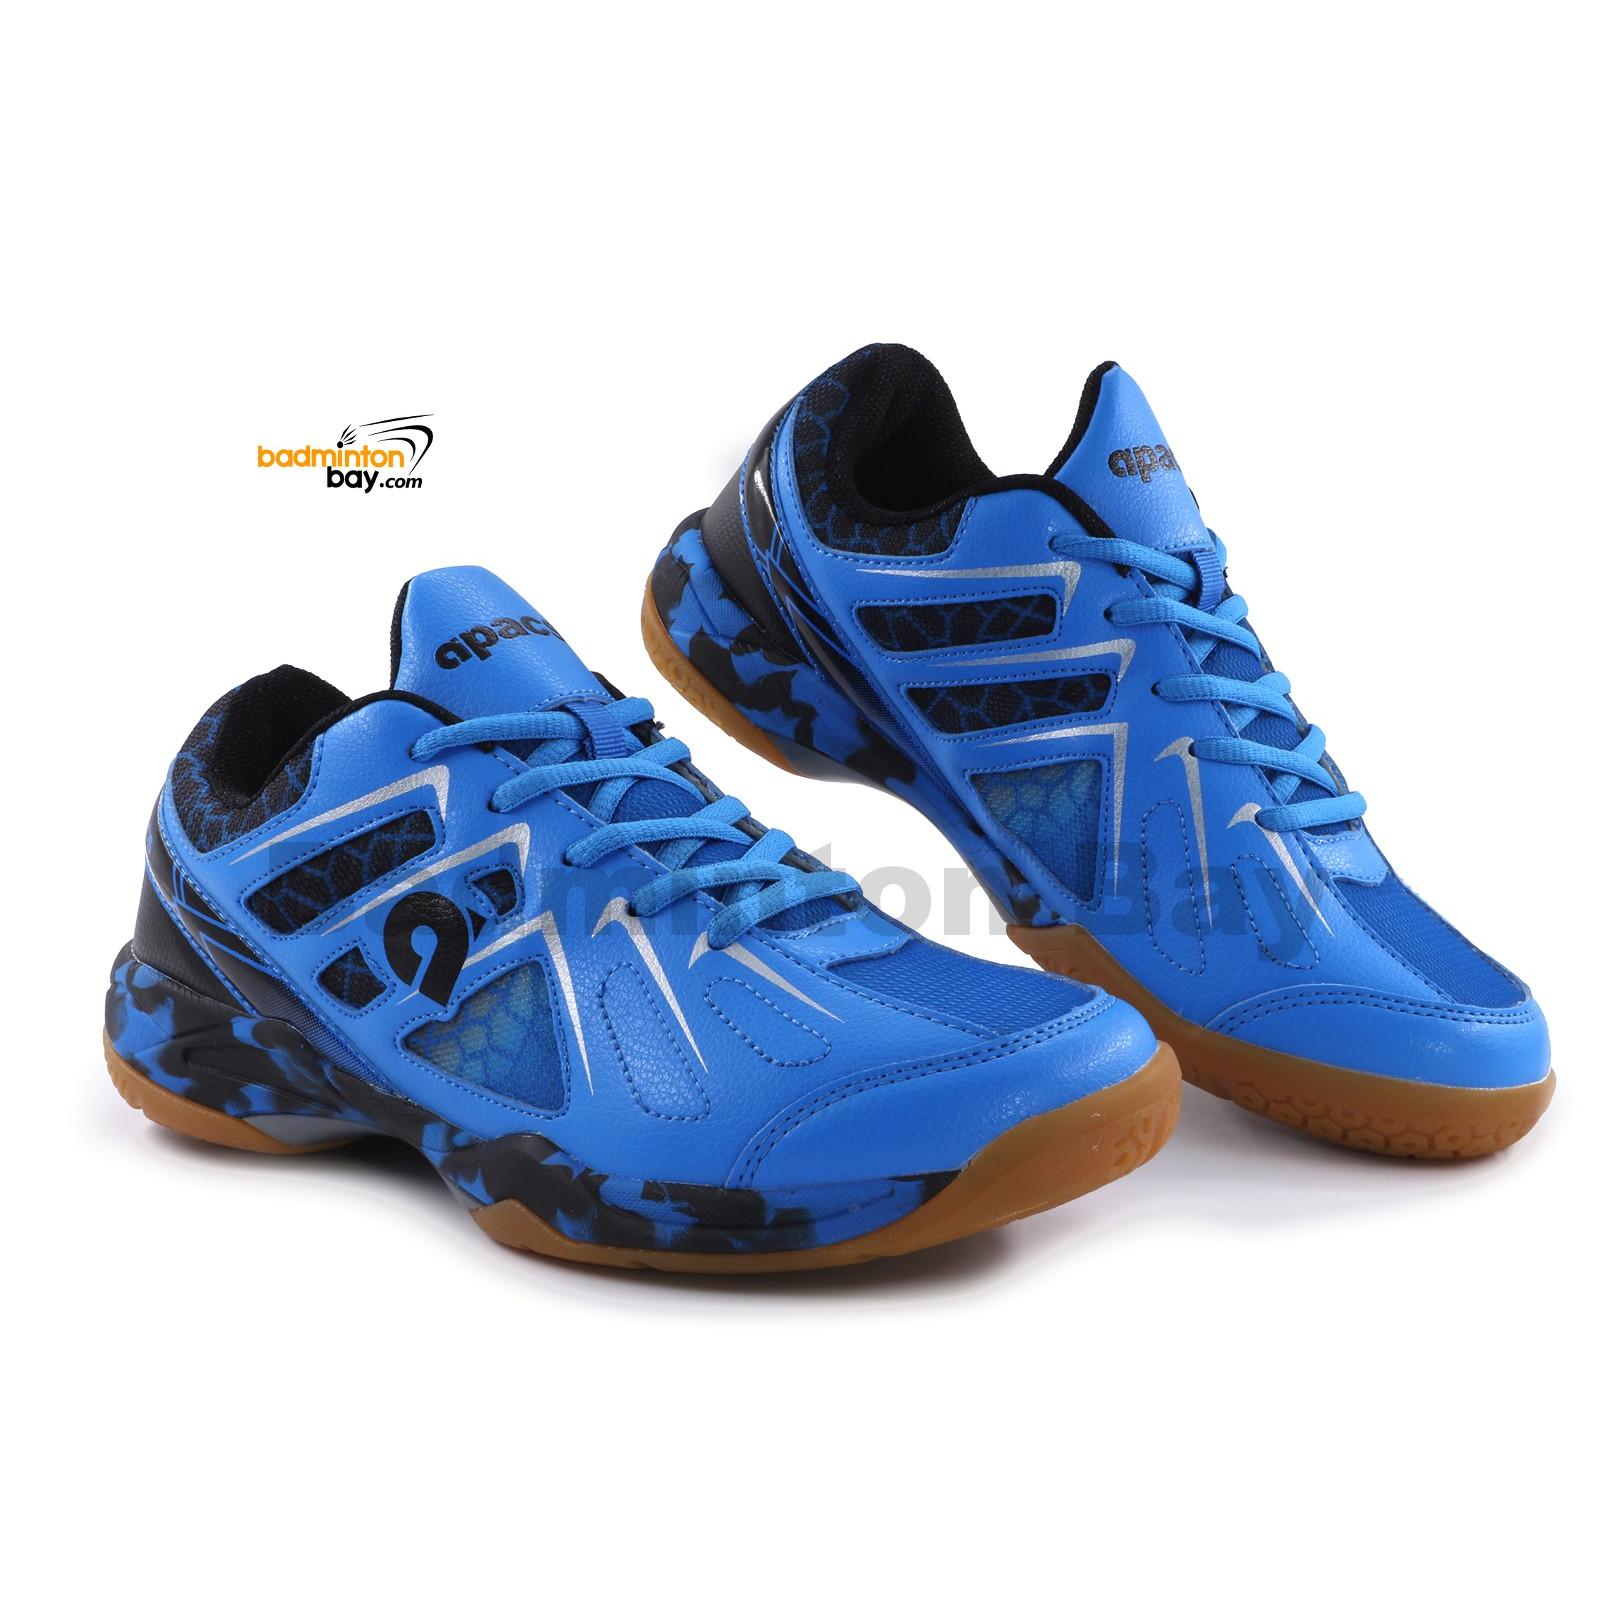 Apacs Cushion Power SP-609-YS Blue Black Badminton Shoes With Improved ...